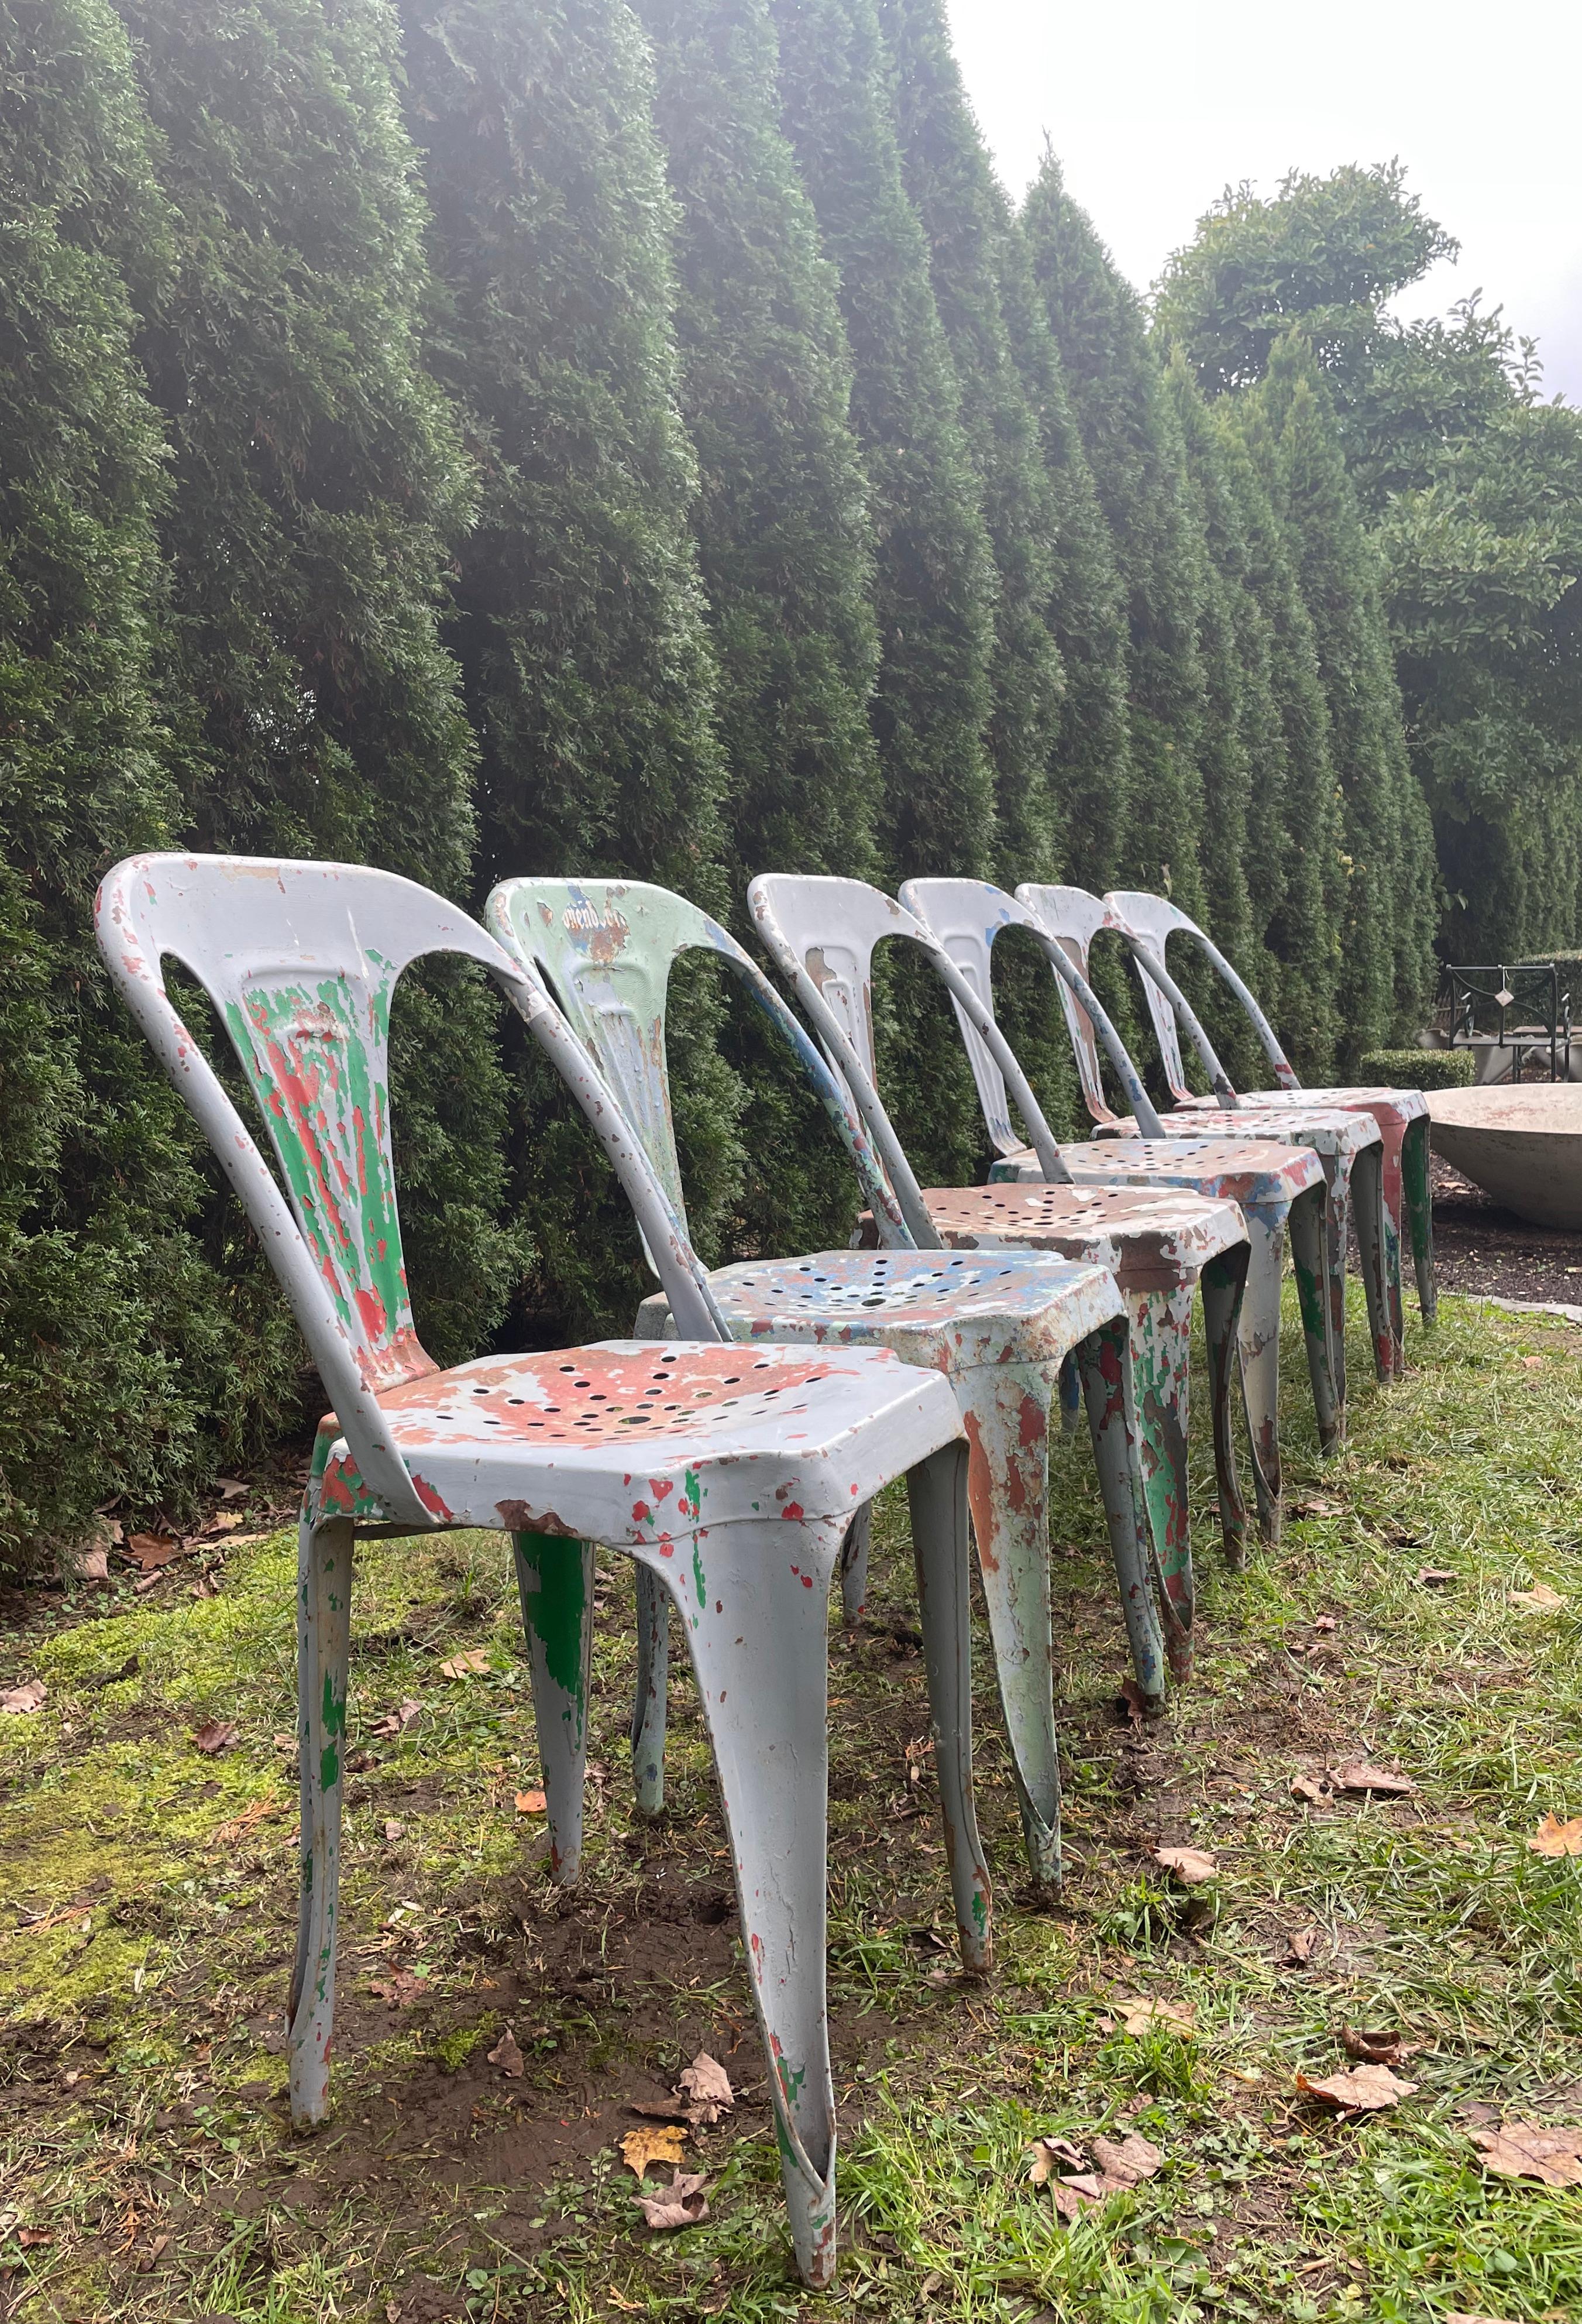 This rare set of six French 1940s Multipl’s metal dining chairs is in excellent original condition and features an amazing mottled painted surface of grey, green, red, and blue. Designed by Joseph Mathieu and made by Pierre Benite in Lyon, these